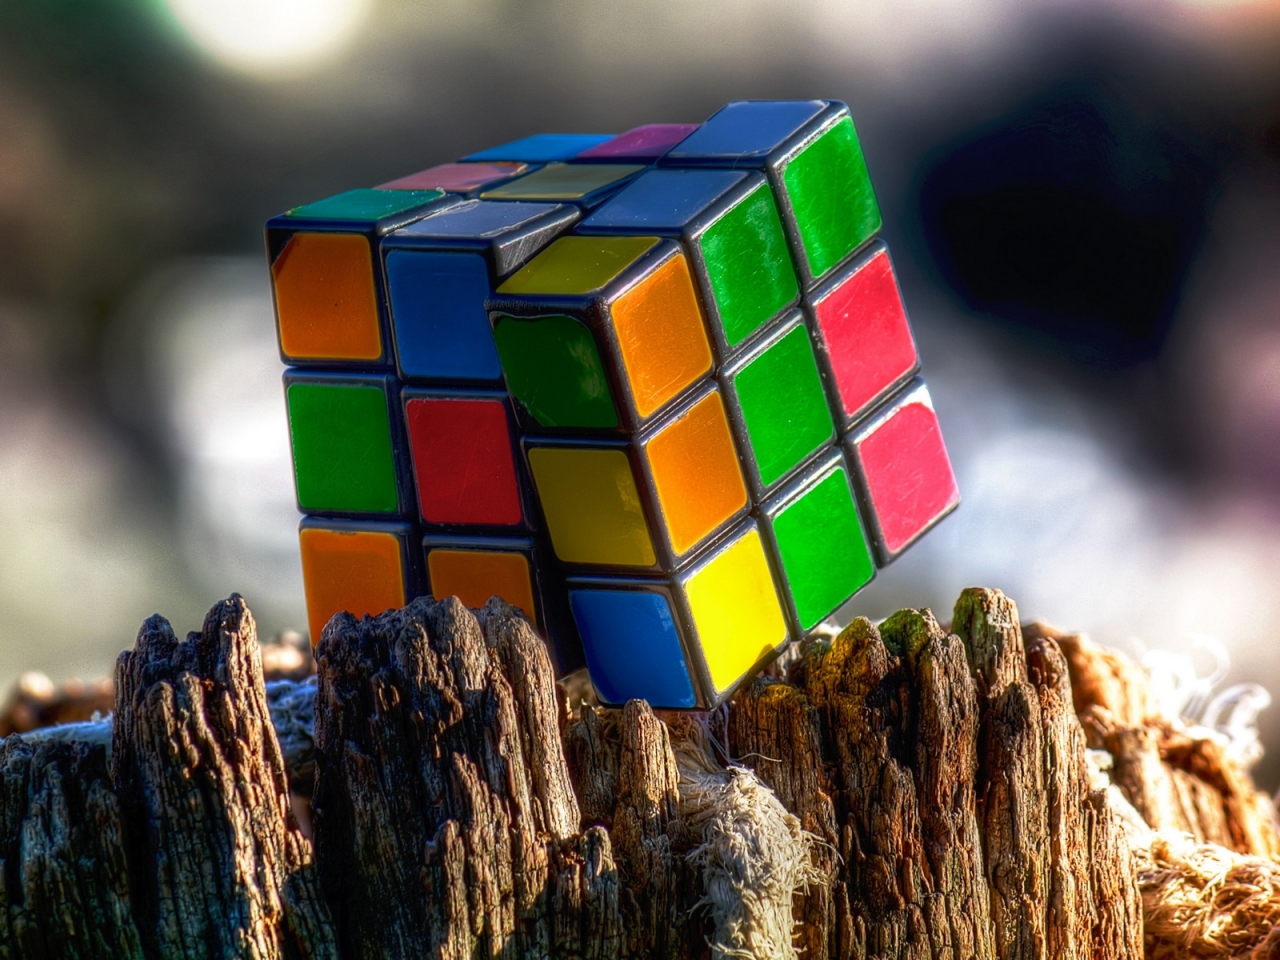 Rubiks Cube for 1280 x 960 resolution